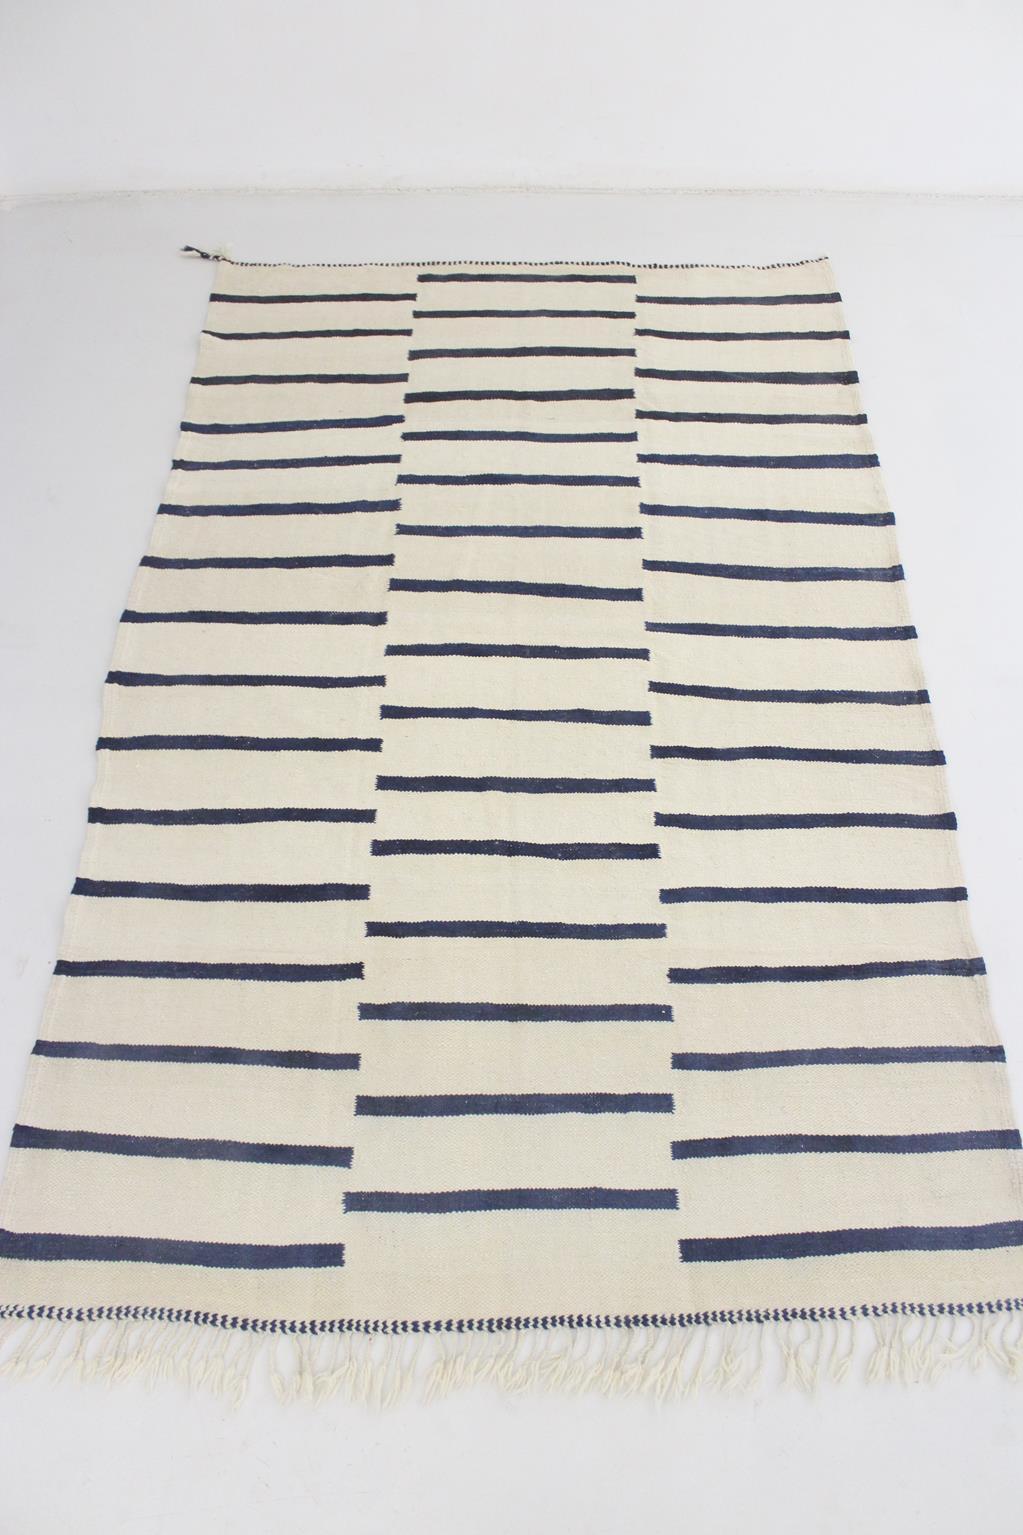 I sourced this newly-made, striped kilim Zanafi in the area of Khenifra, Morocco.

Love the modern, minimalist striped pattern and the different shades of navy blue in this one, that reminds me of the coast. The background of the rug is a light